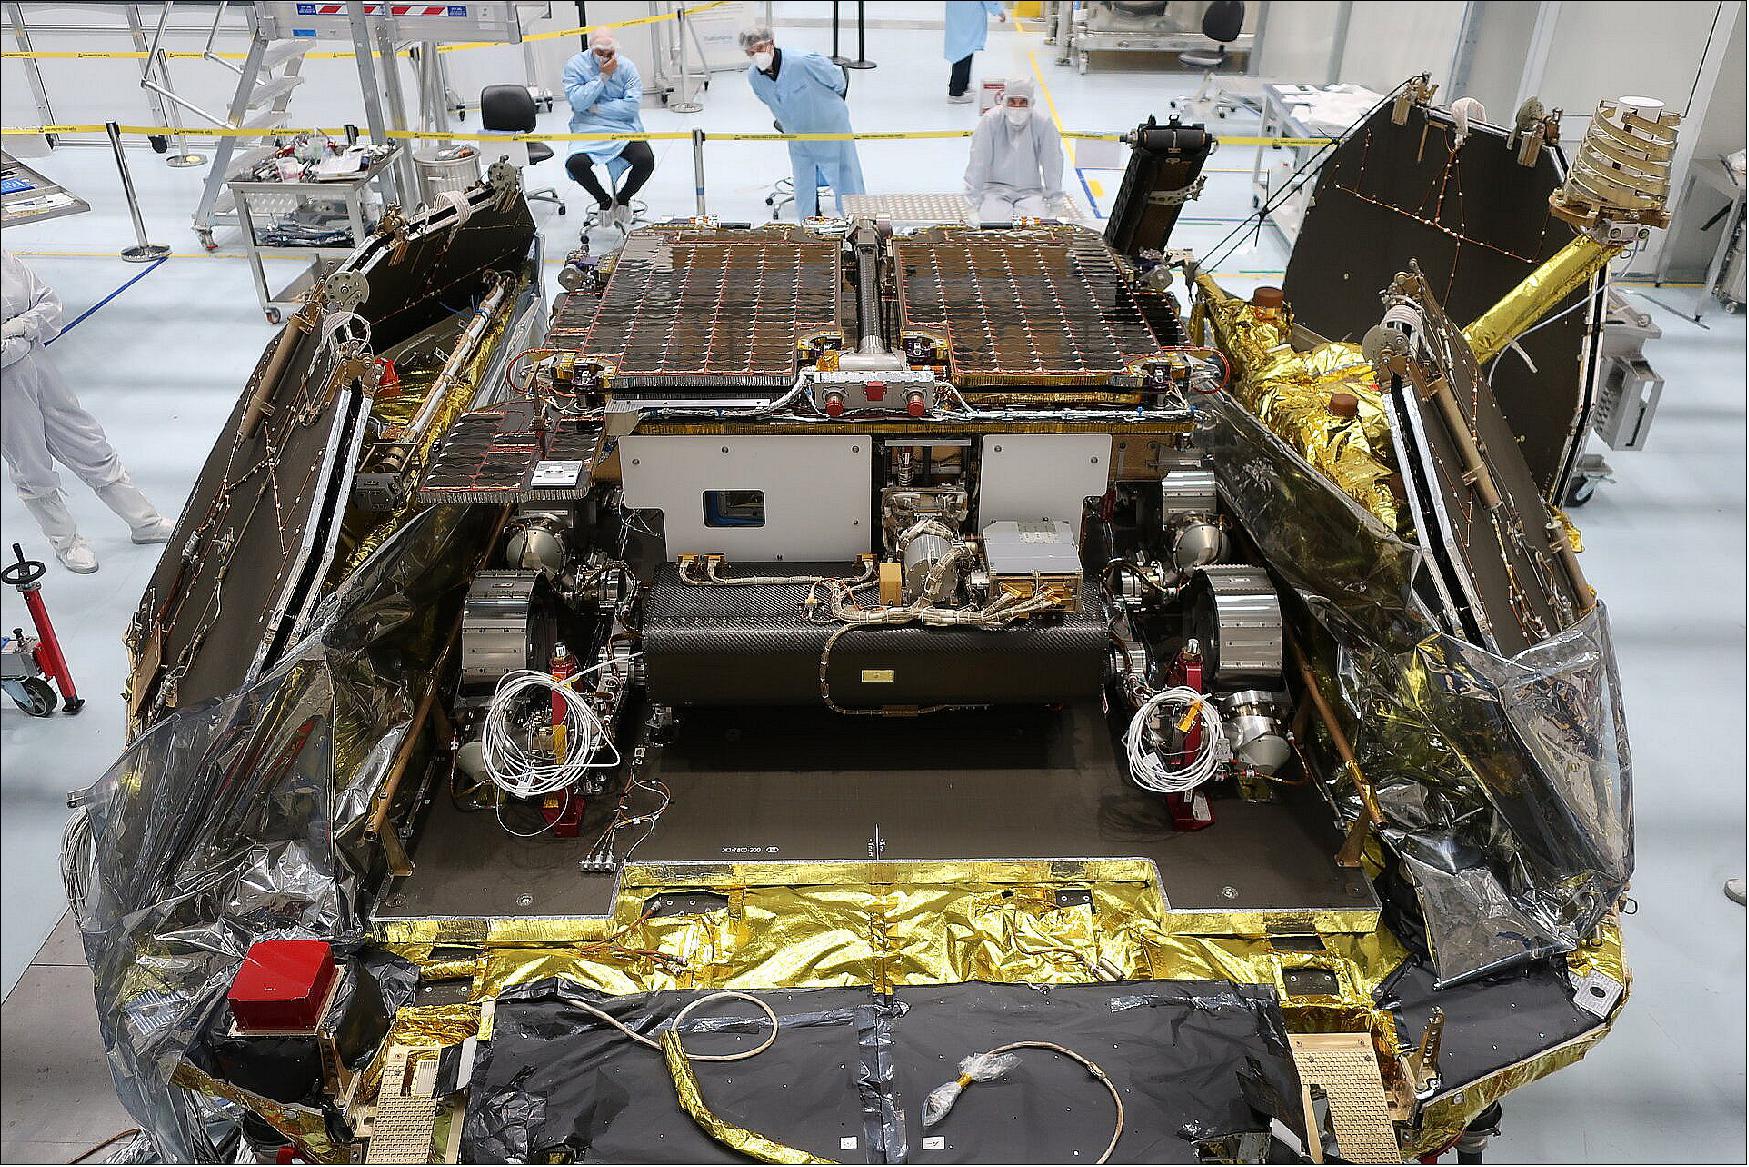 Figure 37: The duo were mated in a dedicated clean room at Thales Alenia Space (TAS), Cannes, together forming the so-called ‘landing module’. The latest round of tests include electrical, power and data transfer checks between the two elements (image credit: TAS)